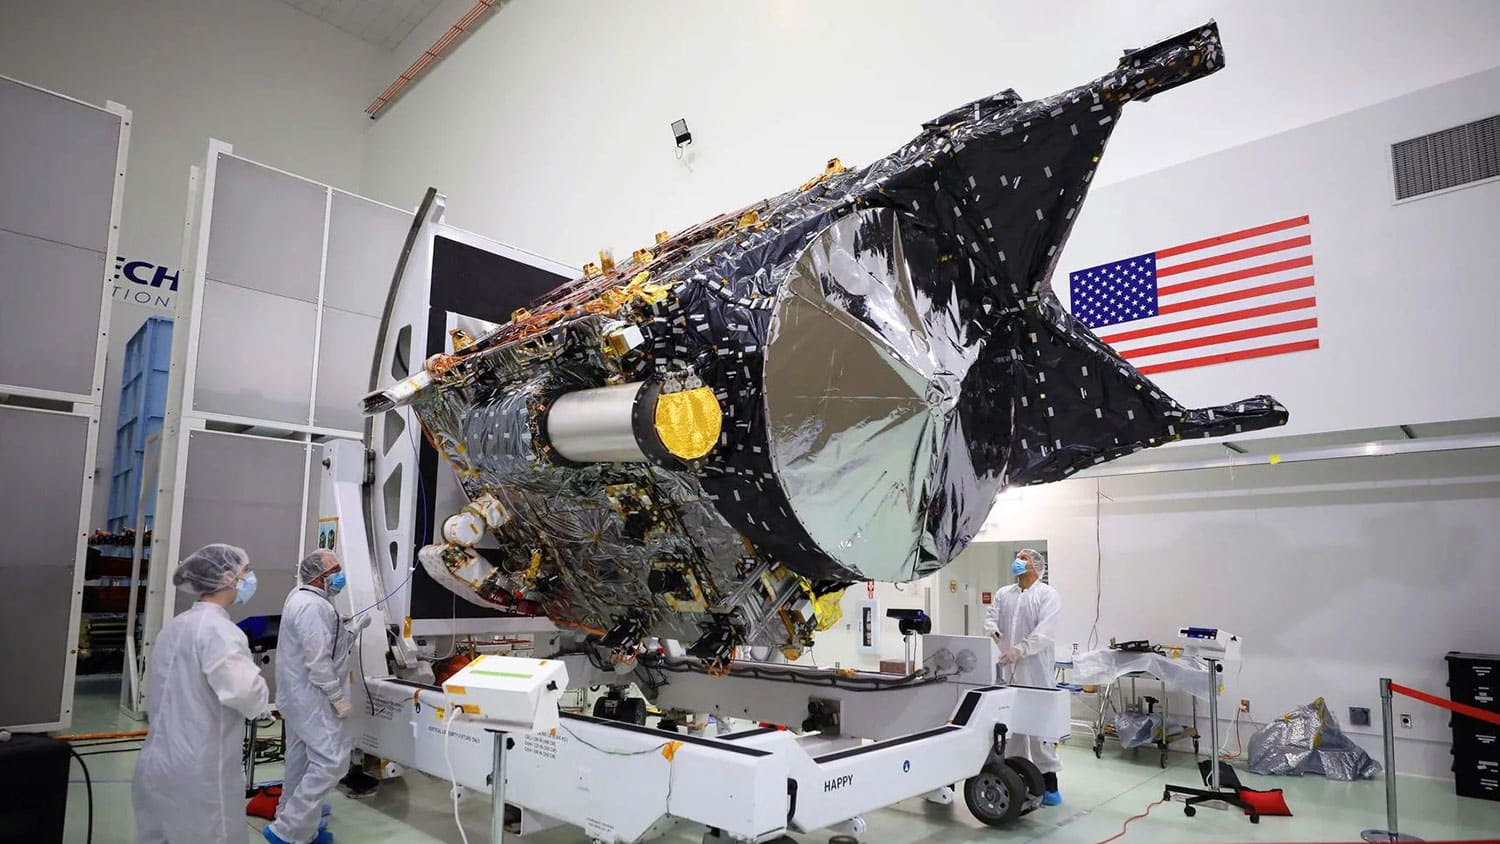 NASA’s Psyche spacecraft is shown in a clean room at the Astrotech Space Operations facility near the agency’s Kennedy Space Center in Florida on Dec. 8, 2022. DSOC’s gold-capped flight laser transceiver can be seen, near center, attached to the spacecraft.